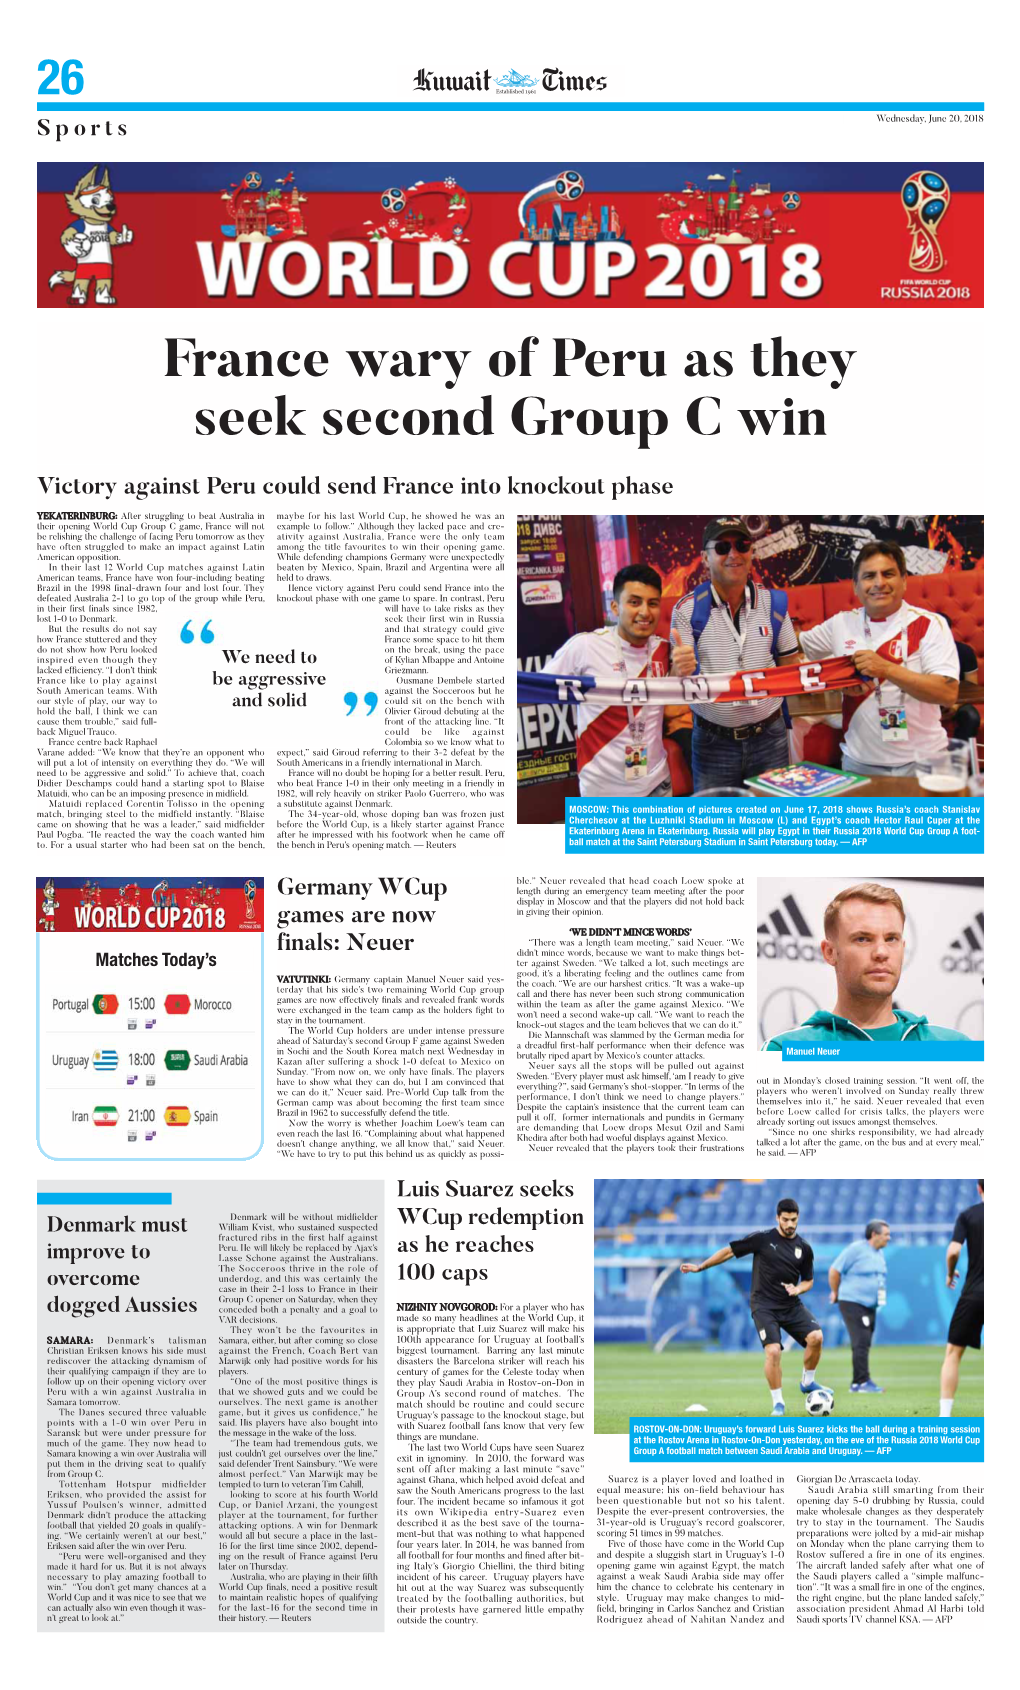 France Wary of Peru As They Seek Second Group C Win